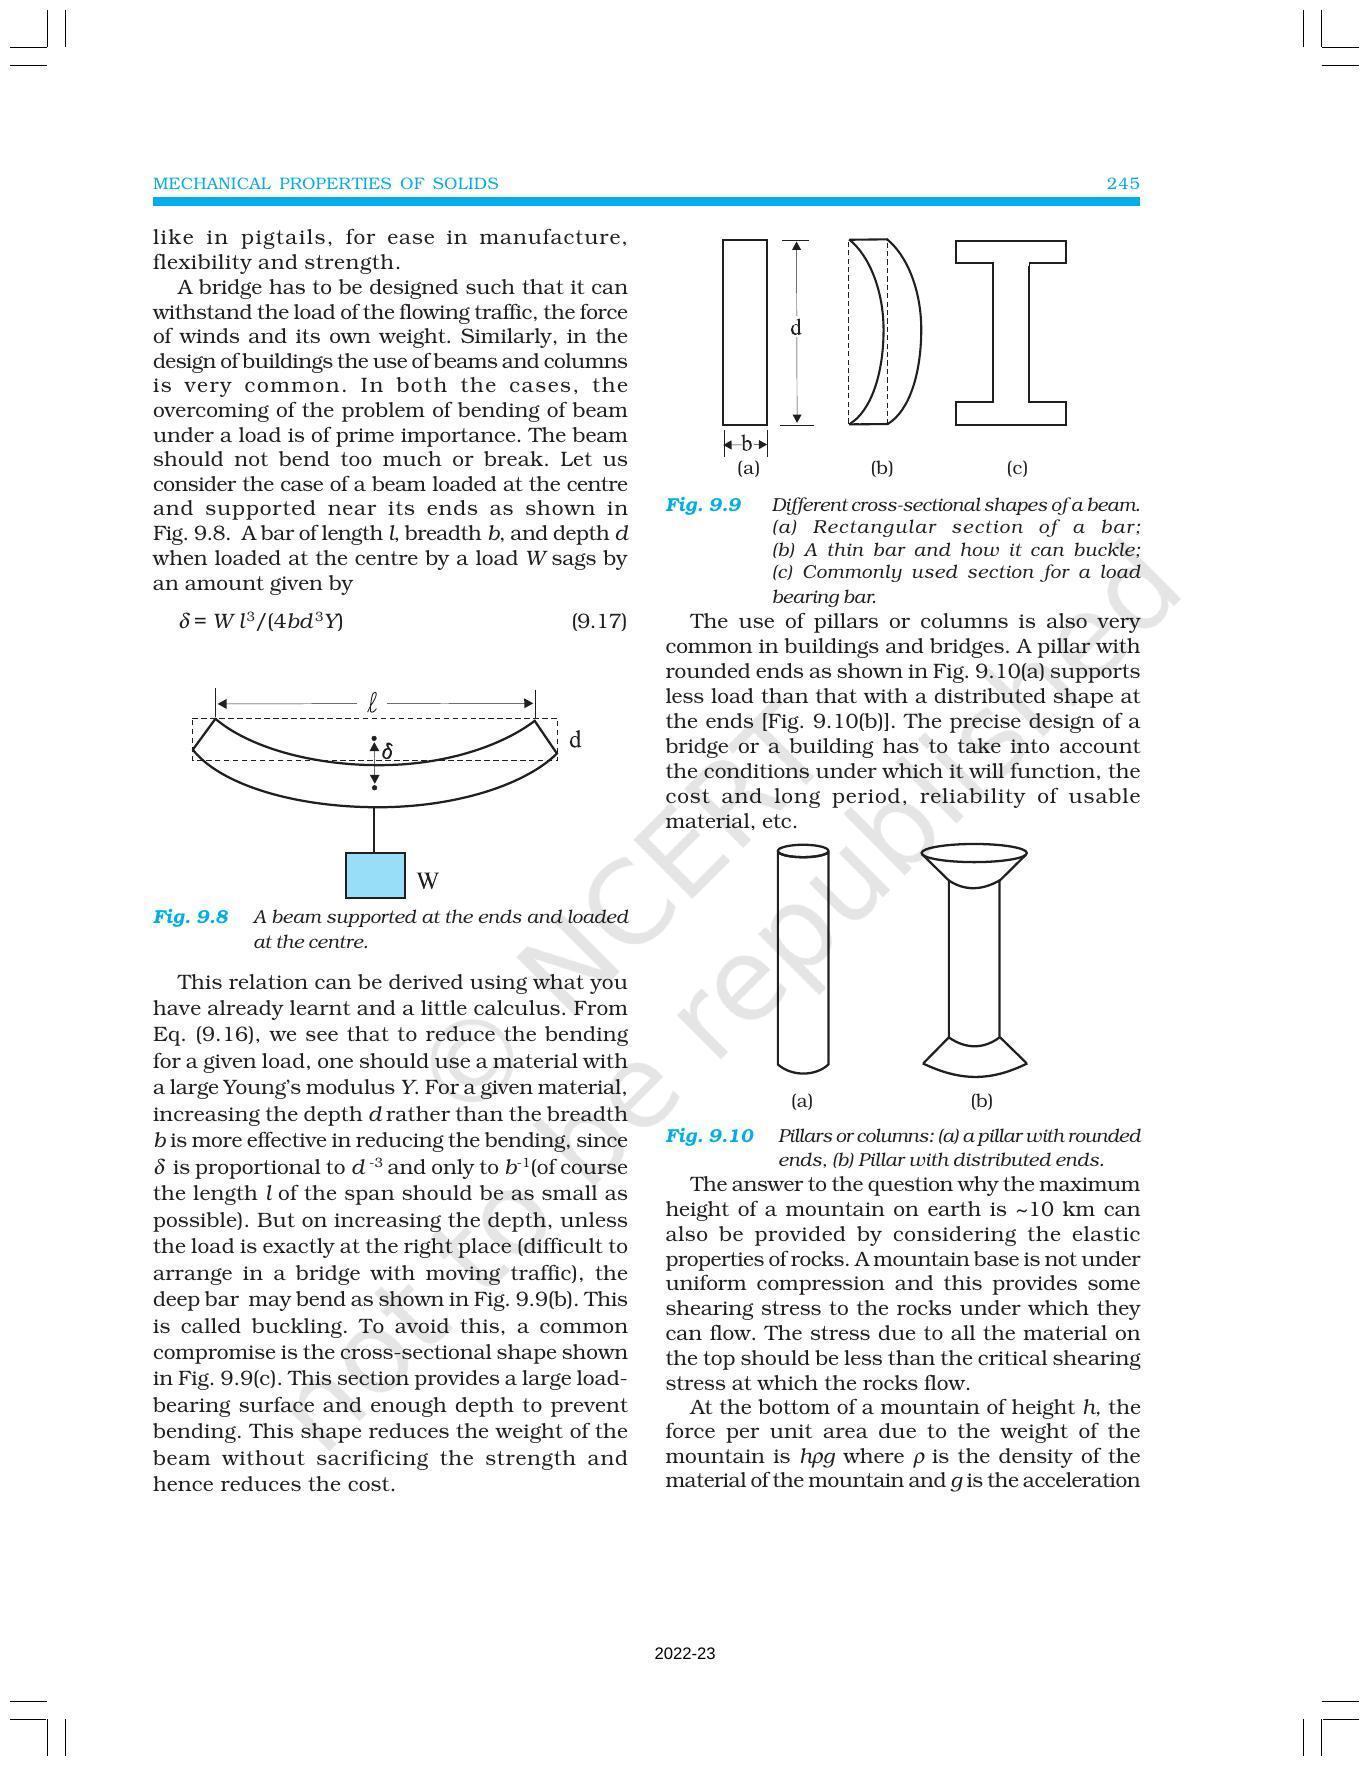 NCERT Book for Class 11 Physics Chapter 9 Mechanical Properties of Solids - Page 11